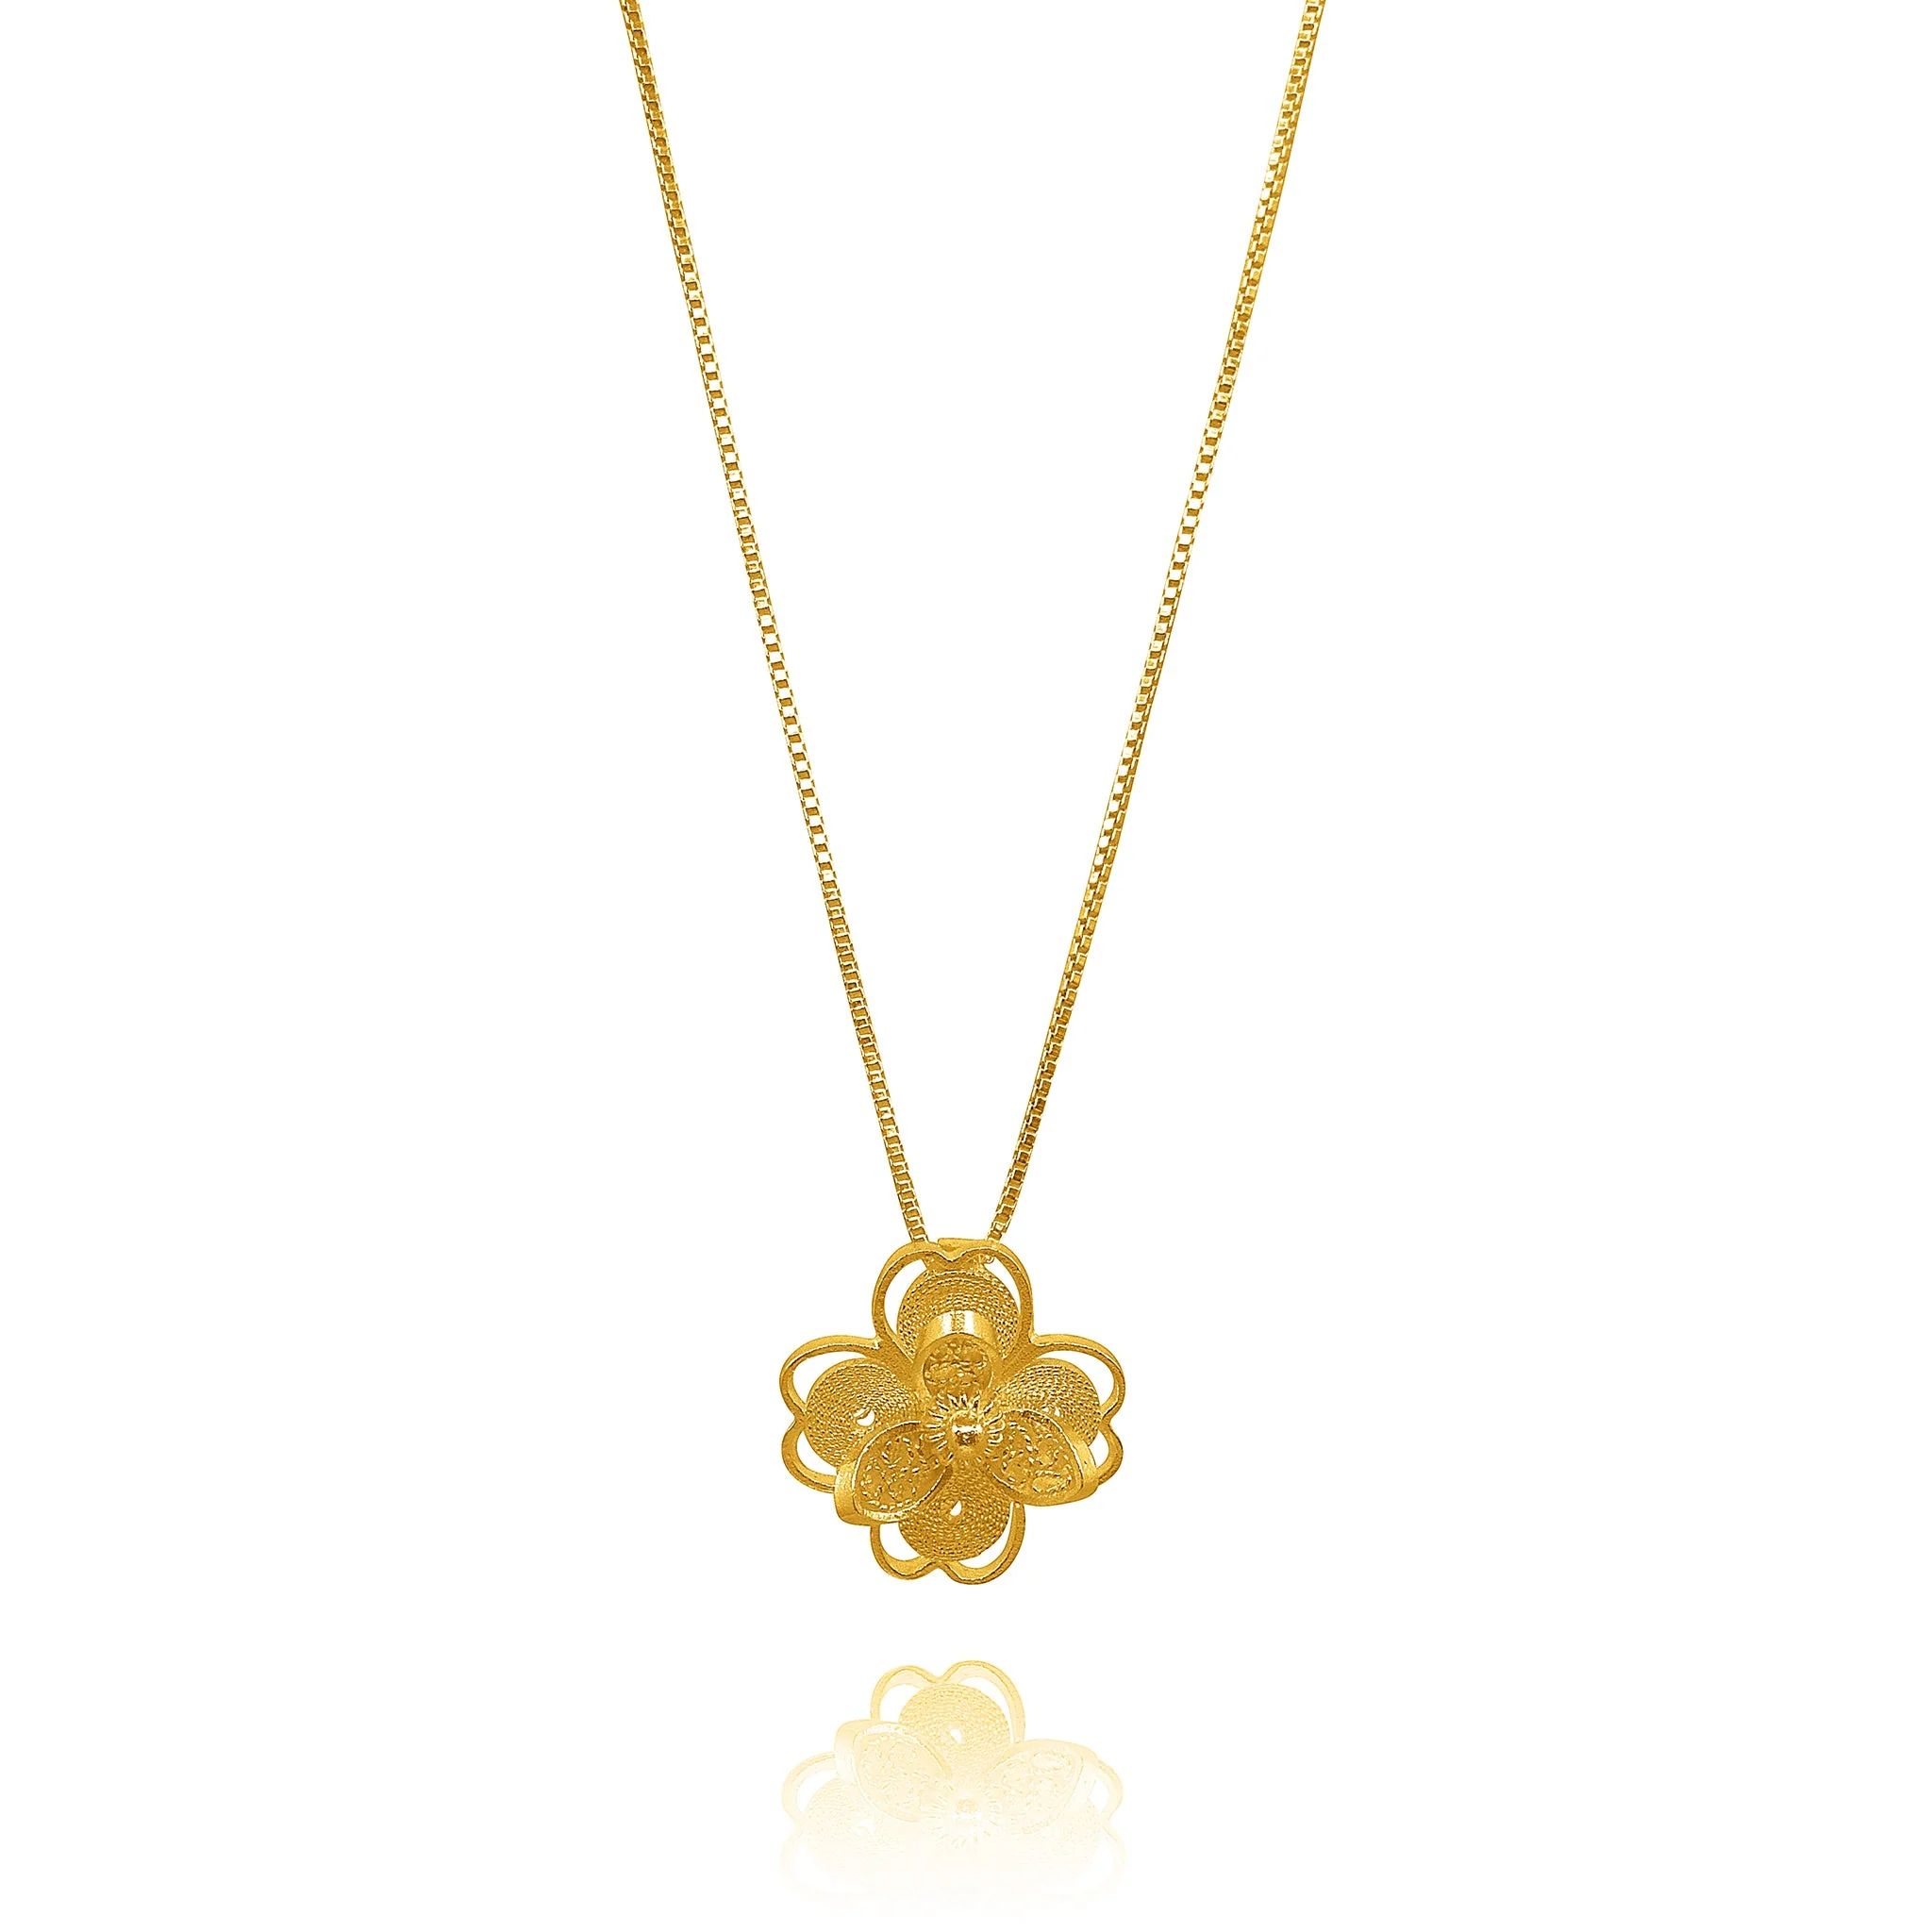 LOTUS SMALL GOLD PENDANT NECKLACE FILIGREE | Olmox Jewelry